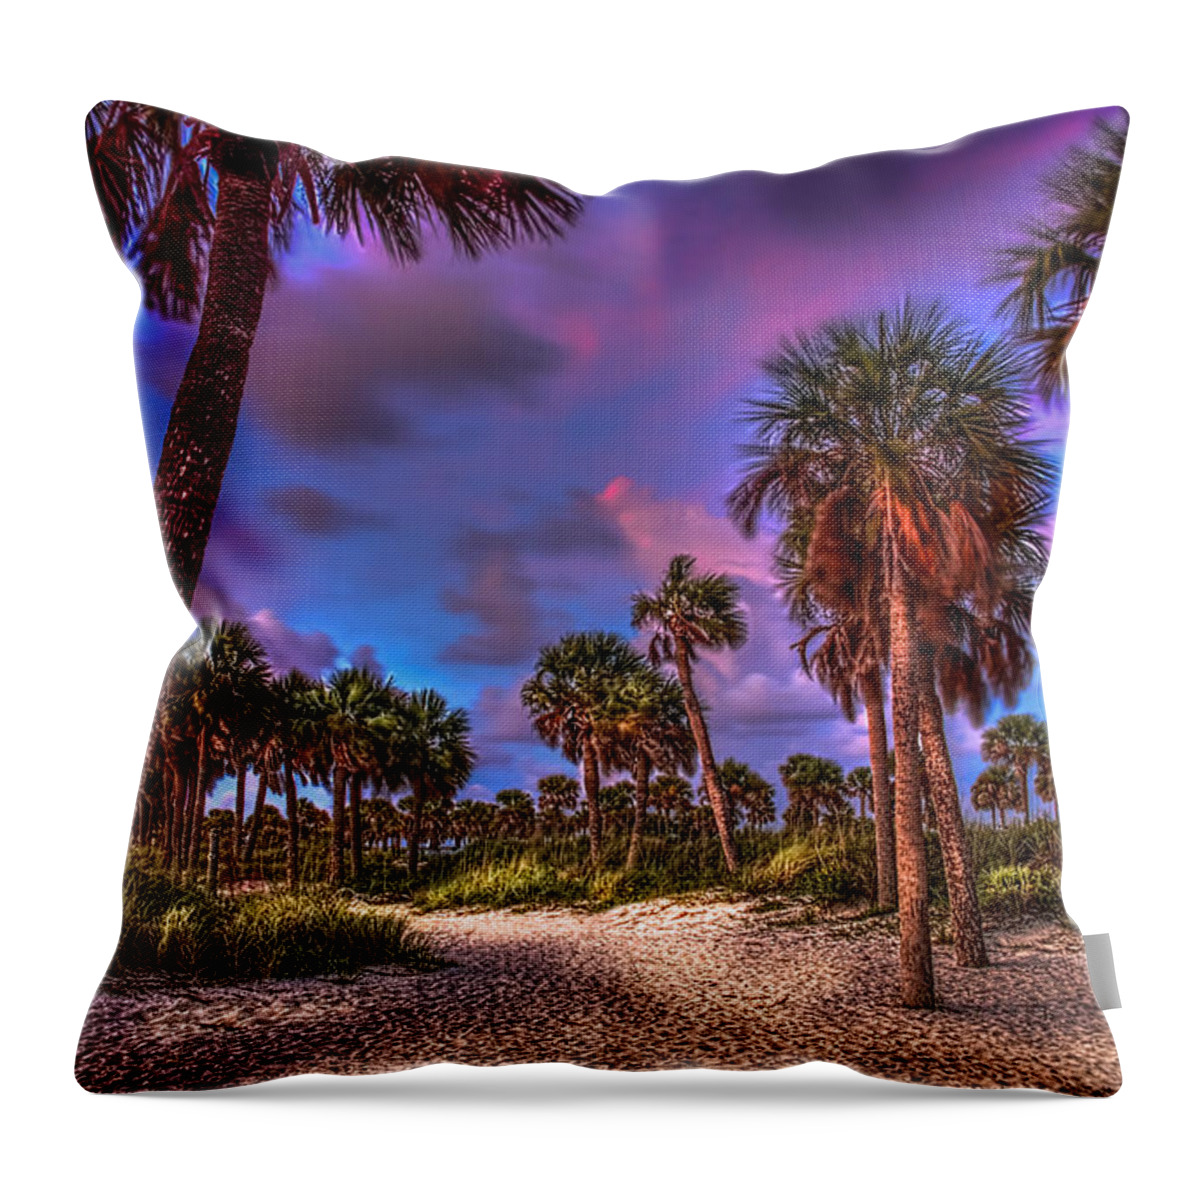 Landscape Throw Pillow featuring the photograph Palm Grove by Marvin Spates